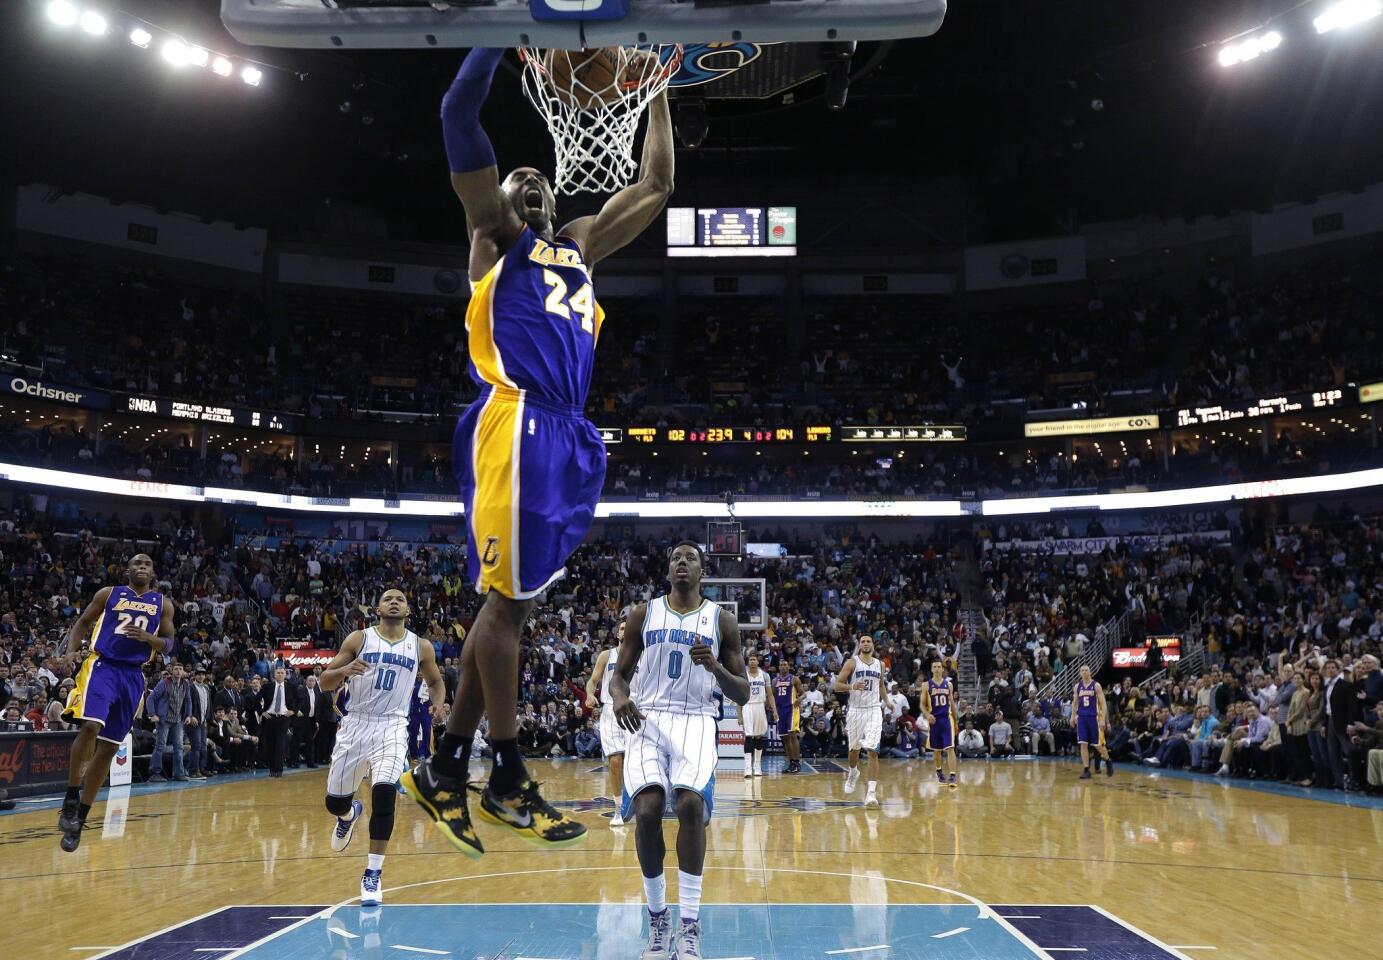 Lakers guard Kobe Bryant breaks away for a dunk in the final minute against the Hornets to help seal a 108-102 victory in New Orleans on Wednesday night.